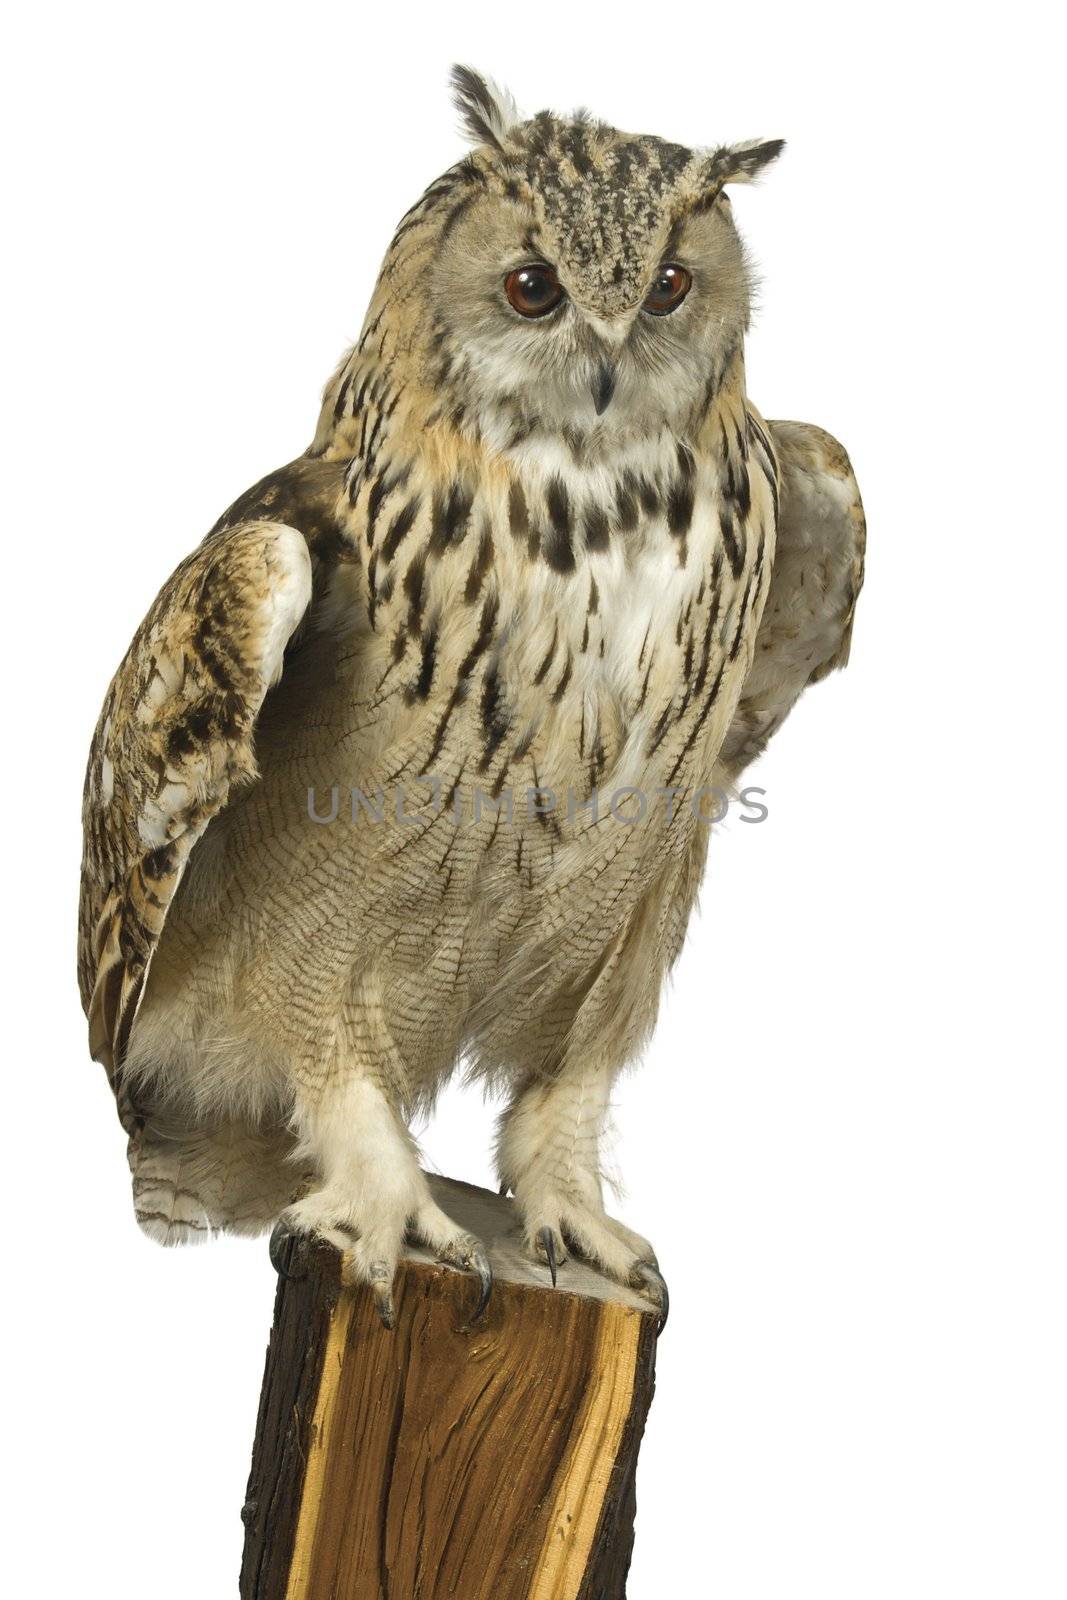 Eagle owl on a branch of a tree